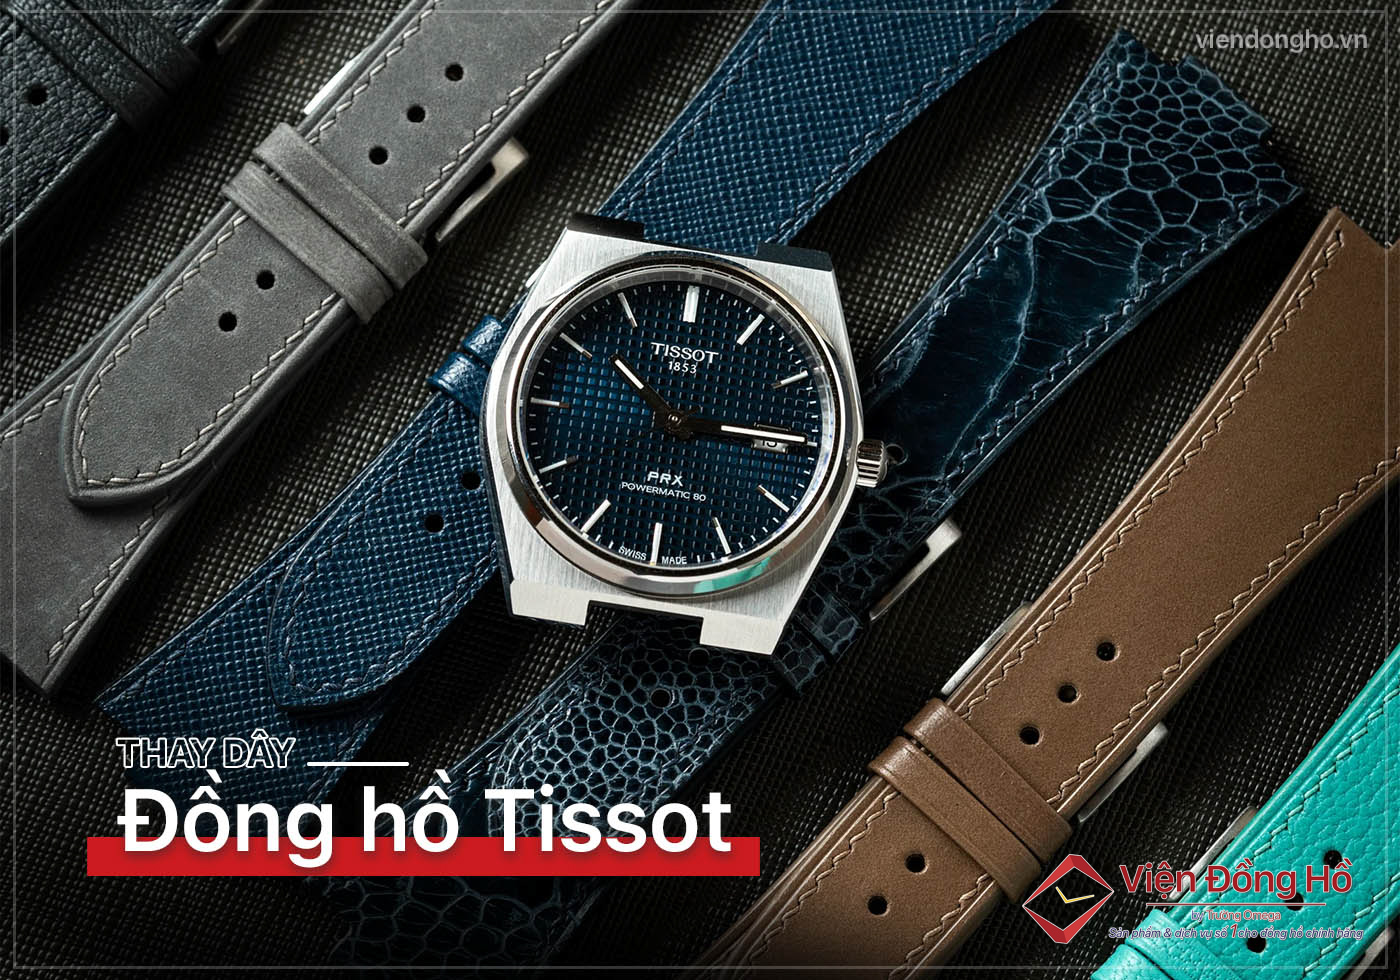 Thay day dong ho Tissot 5